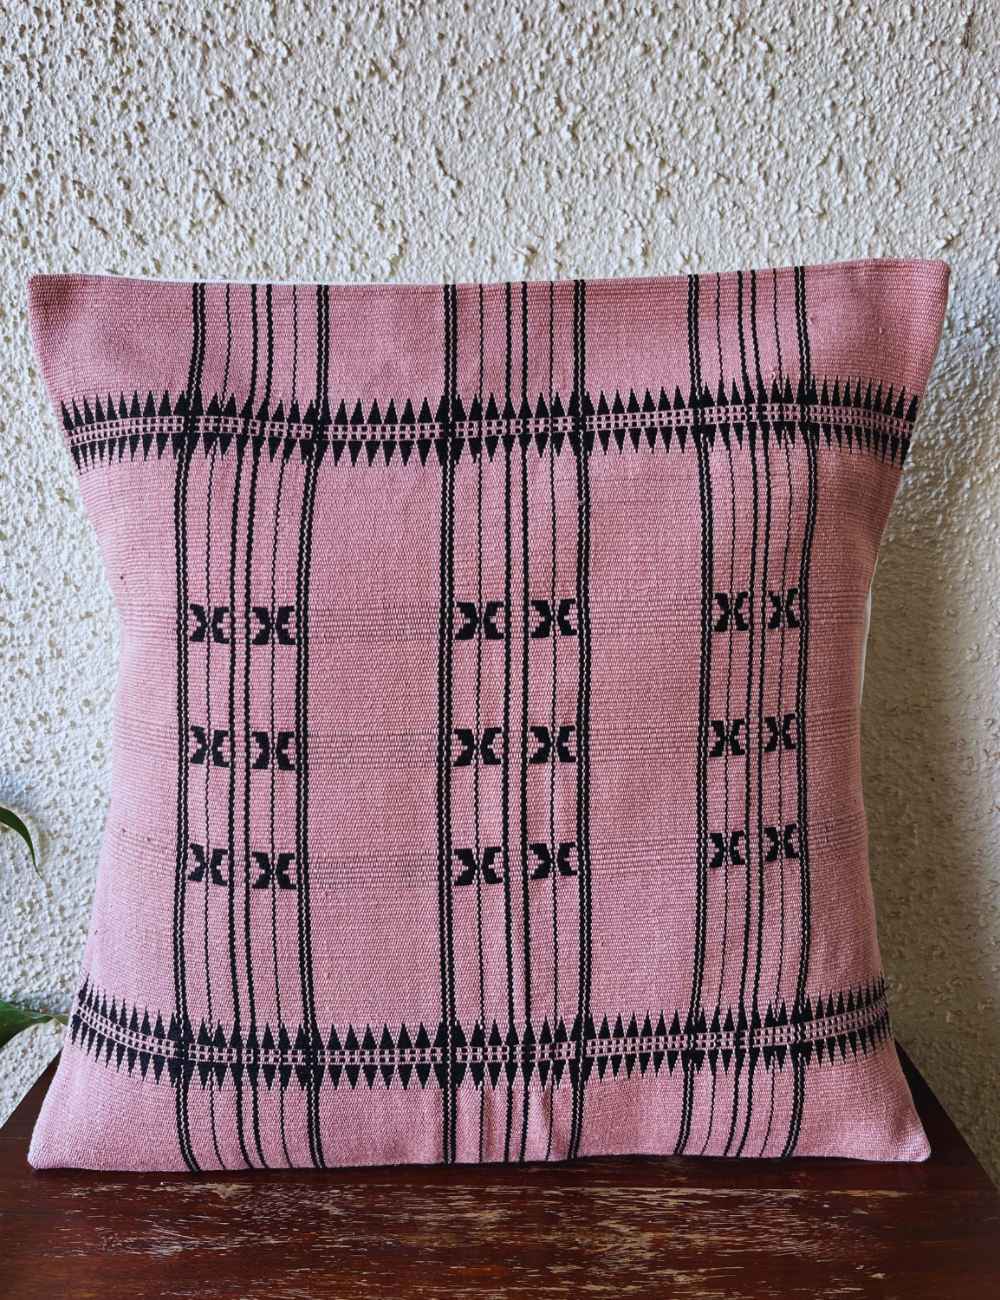 Chizami Weaves - Loin Loom Handwoven Cushion Cover Set in Mauve (Set of 2)